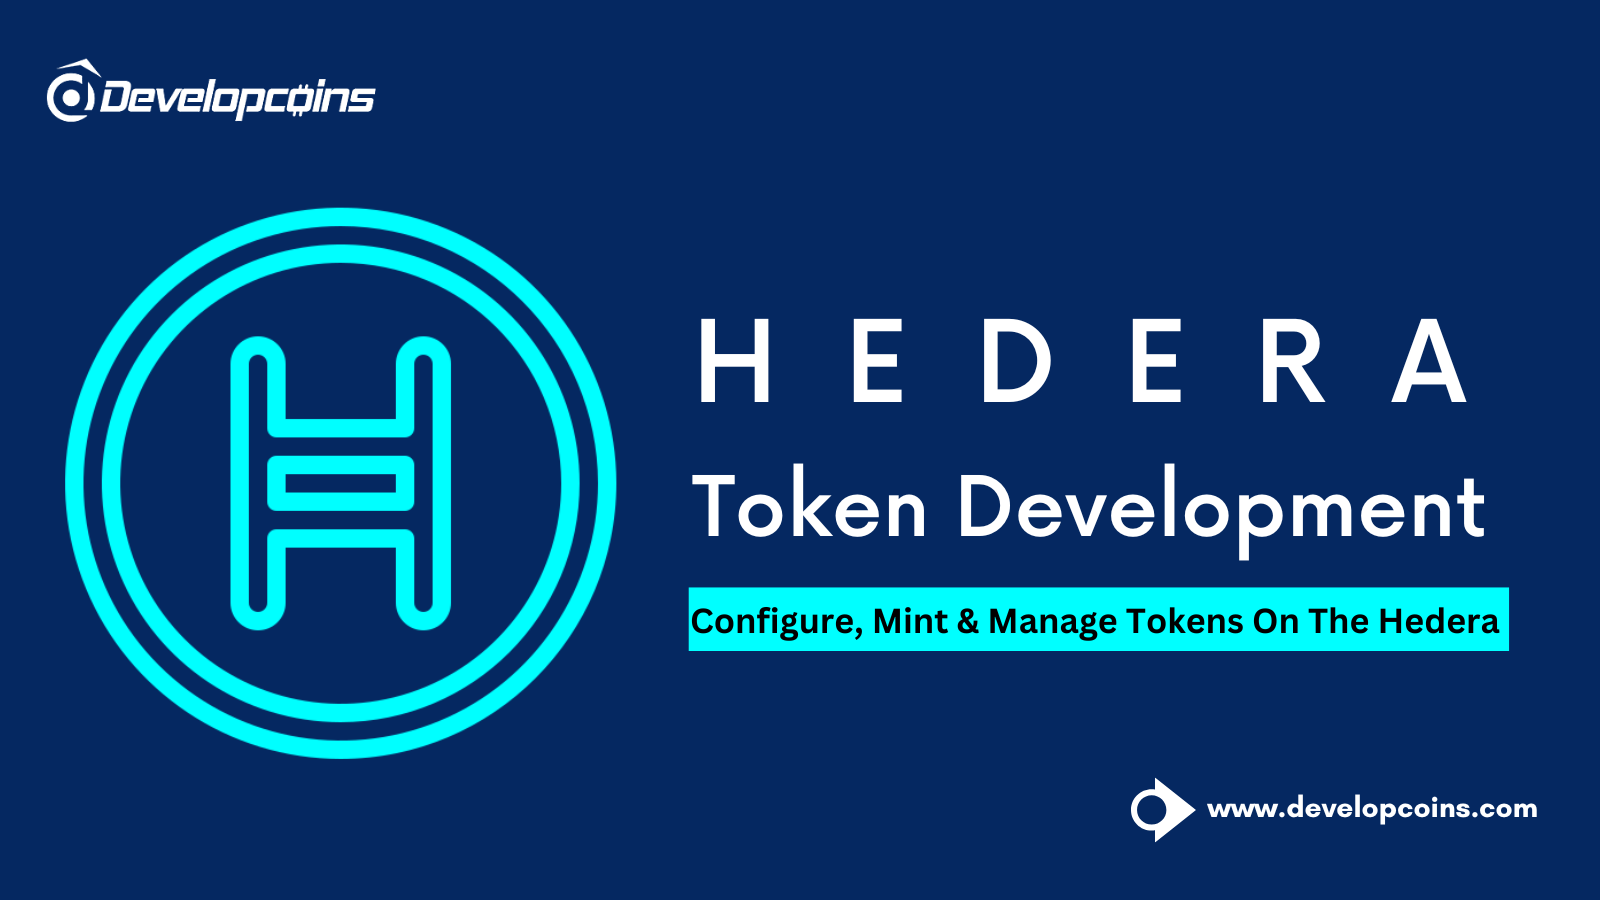 Hedera Token Development - Configure, Mint & Manage Tokens On The Hedera Network